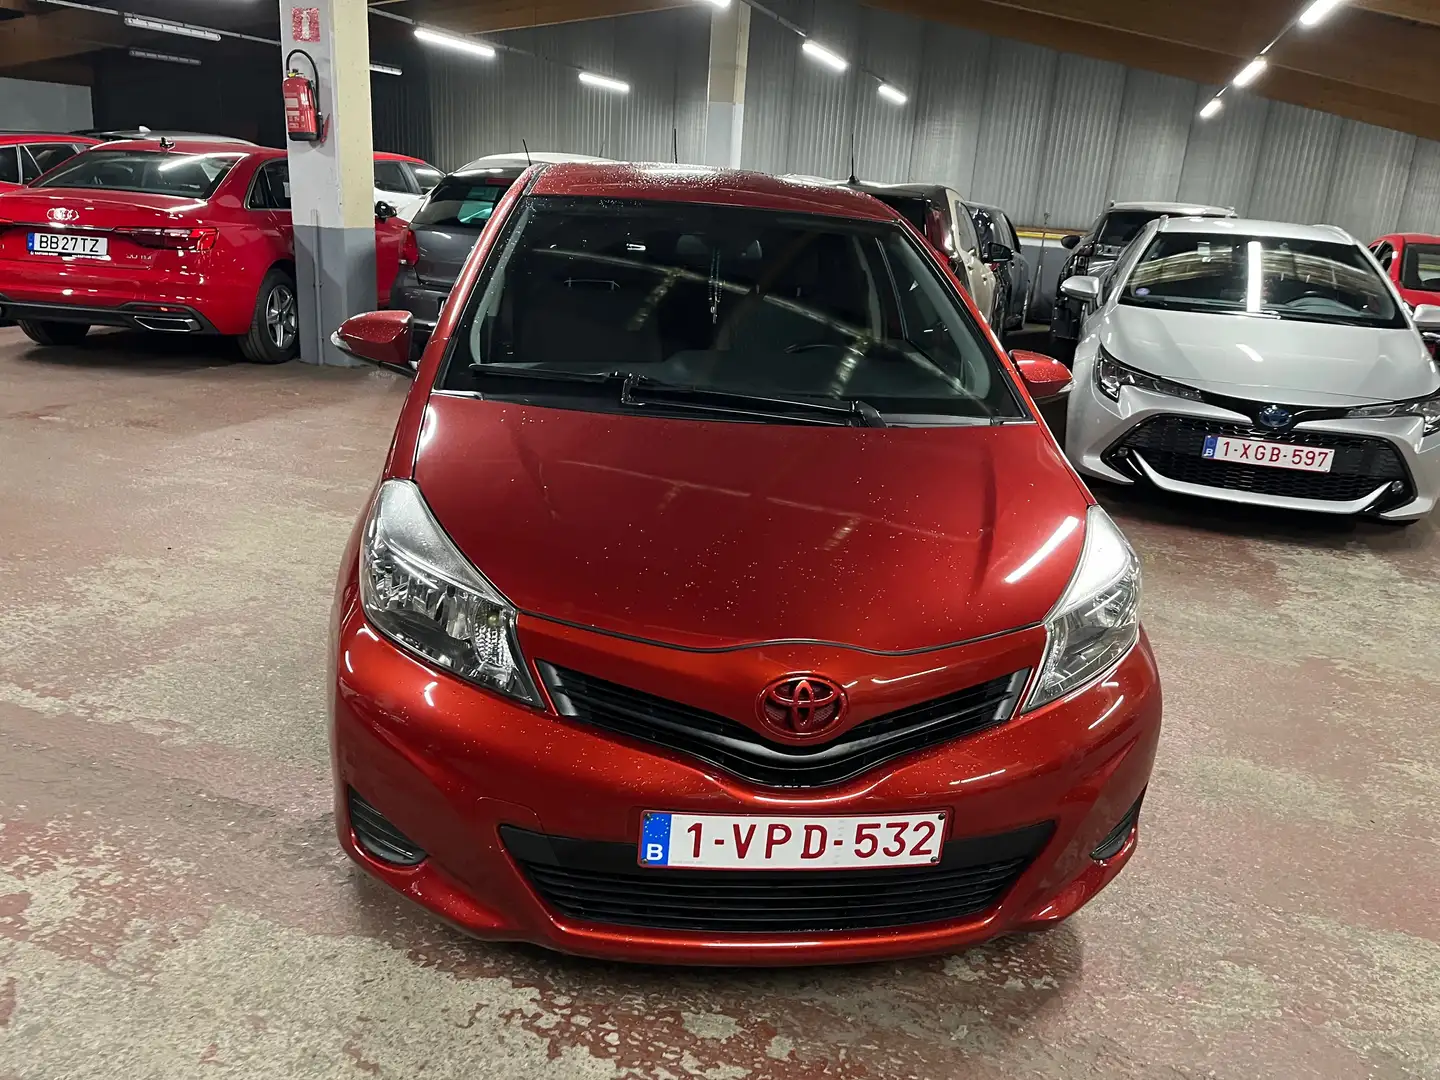 Toyota Yaris 1.4 D-4D Active DPF Red - 2